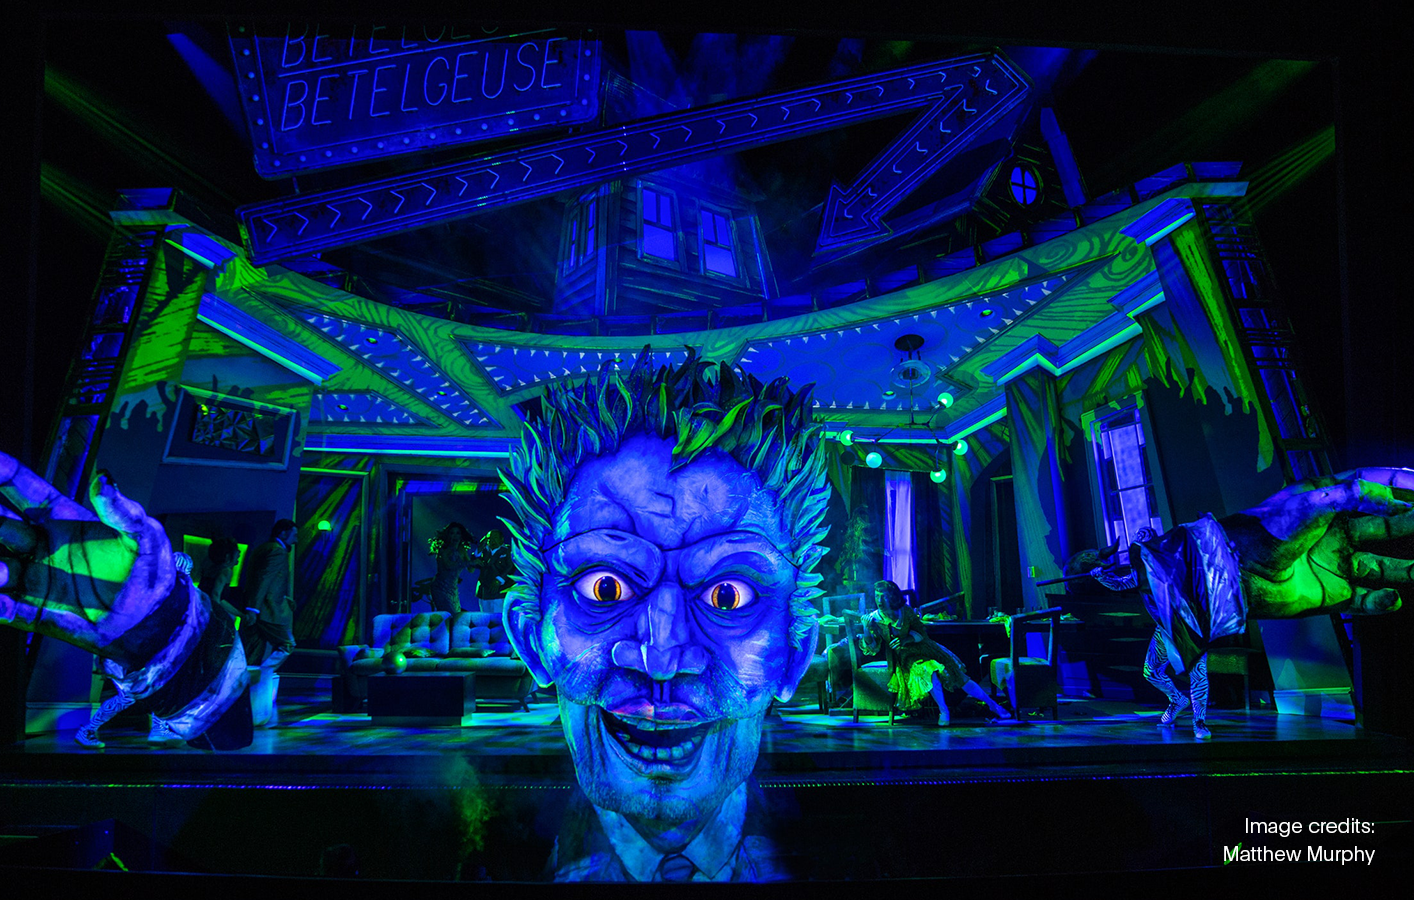 Theatre shows around the world are back, with disguise powering many impressive set designs